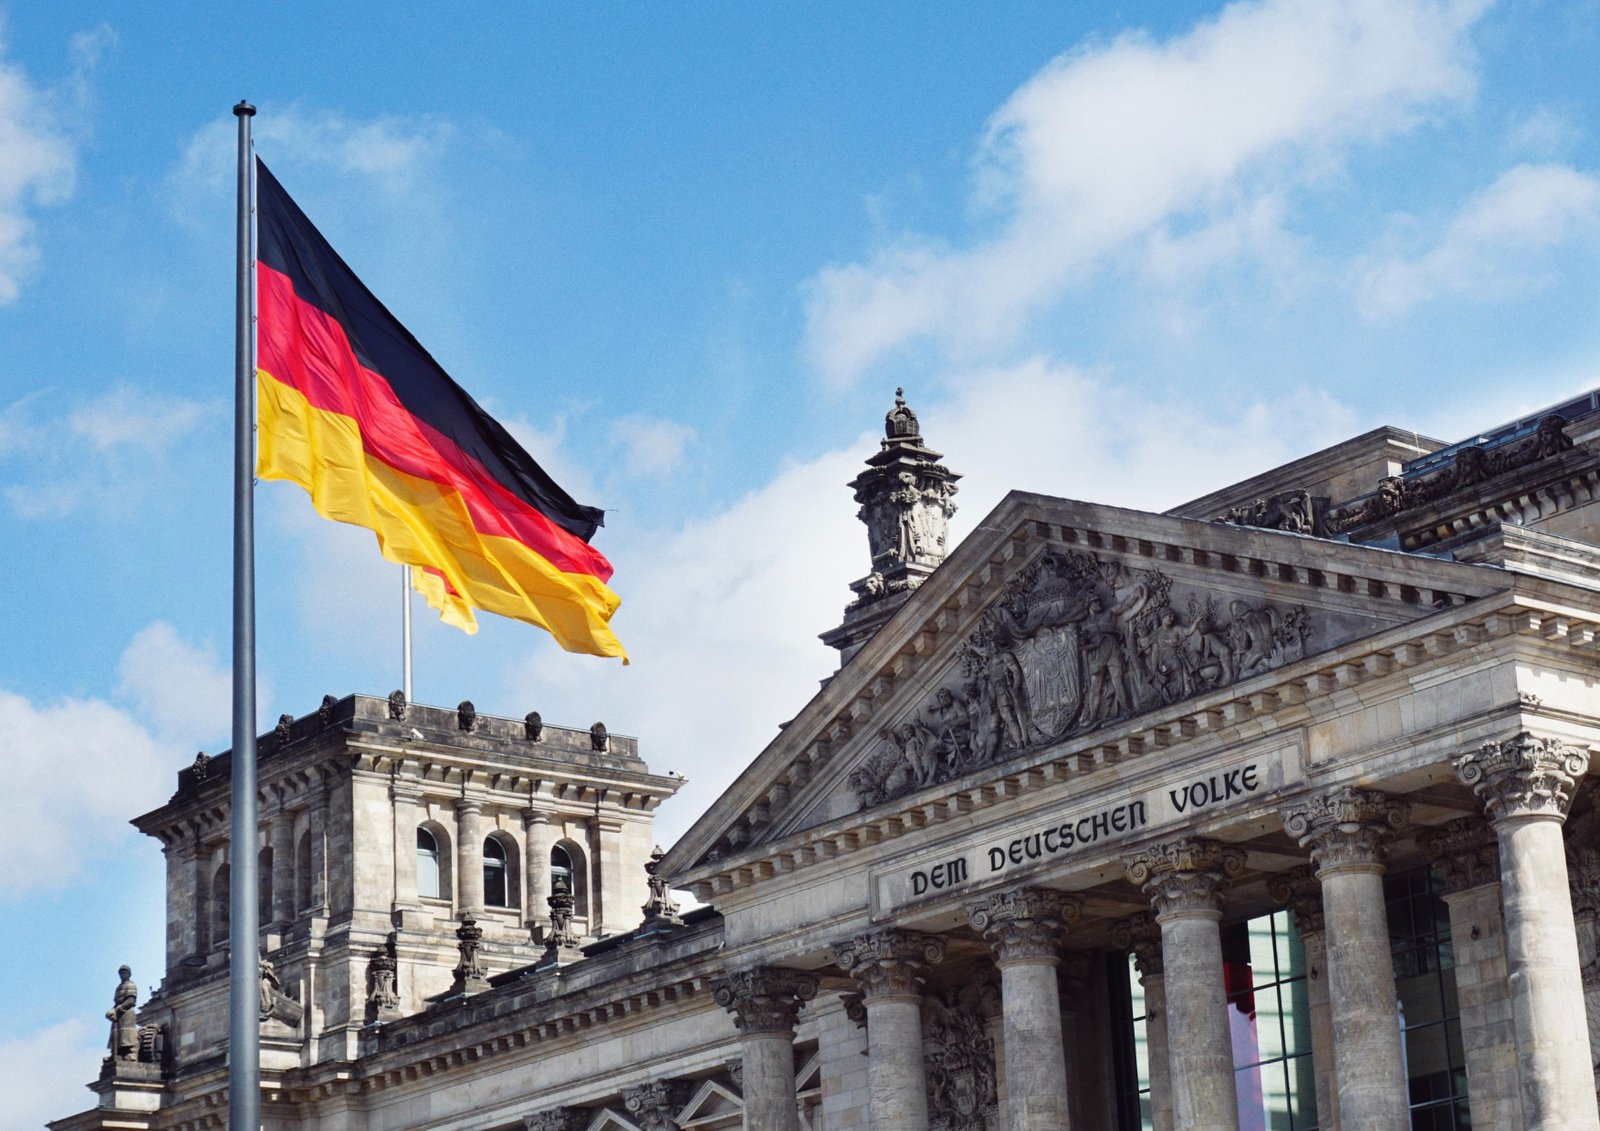 Germany plans to attract International visitors